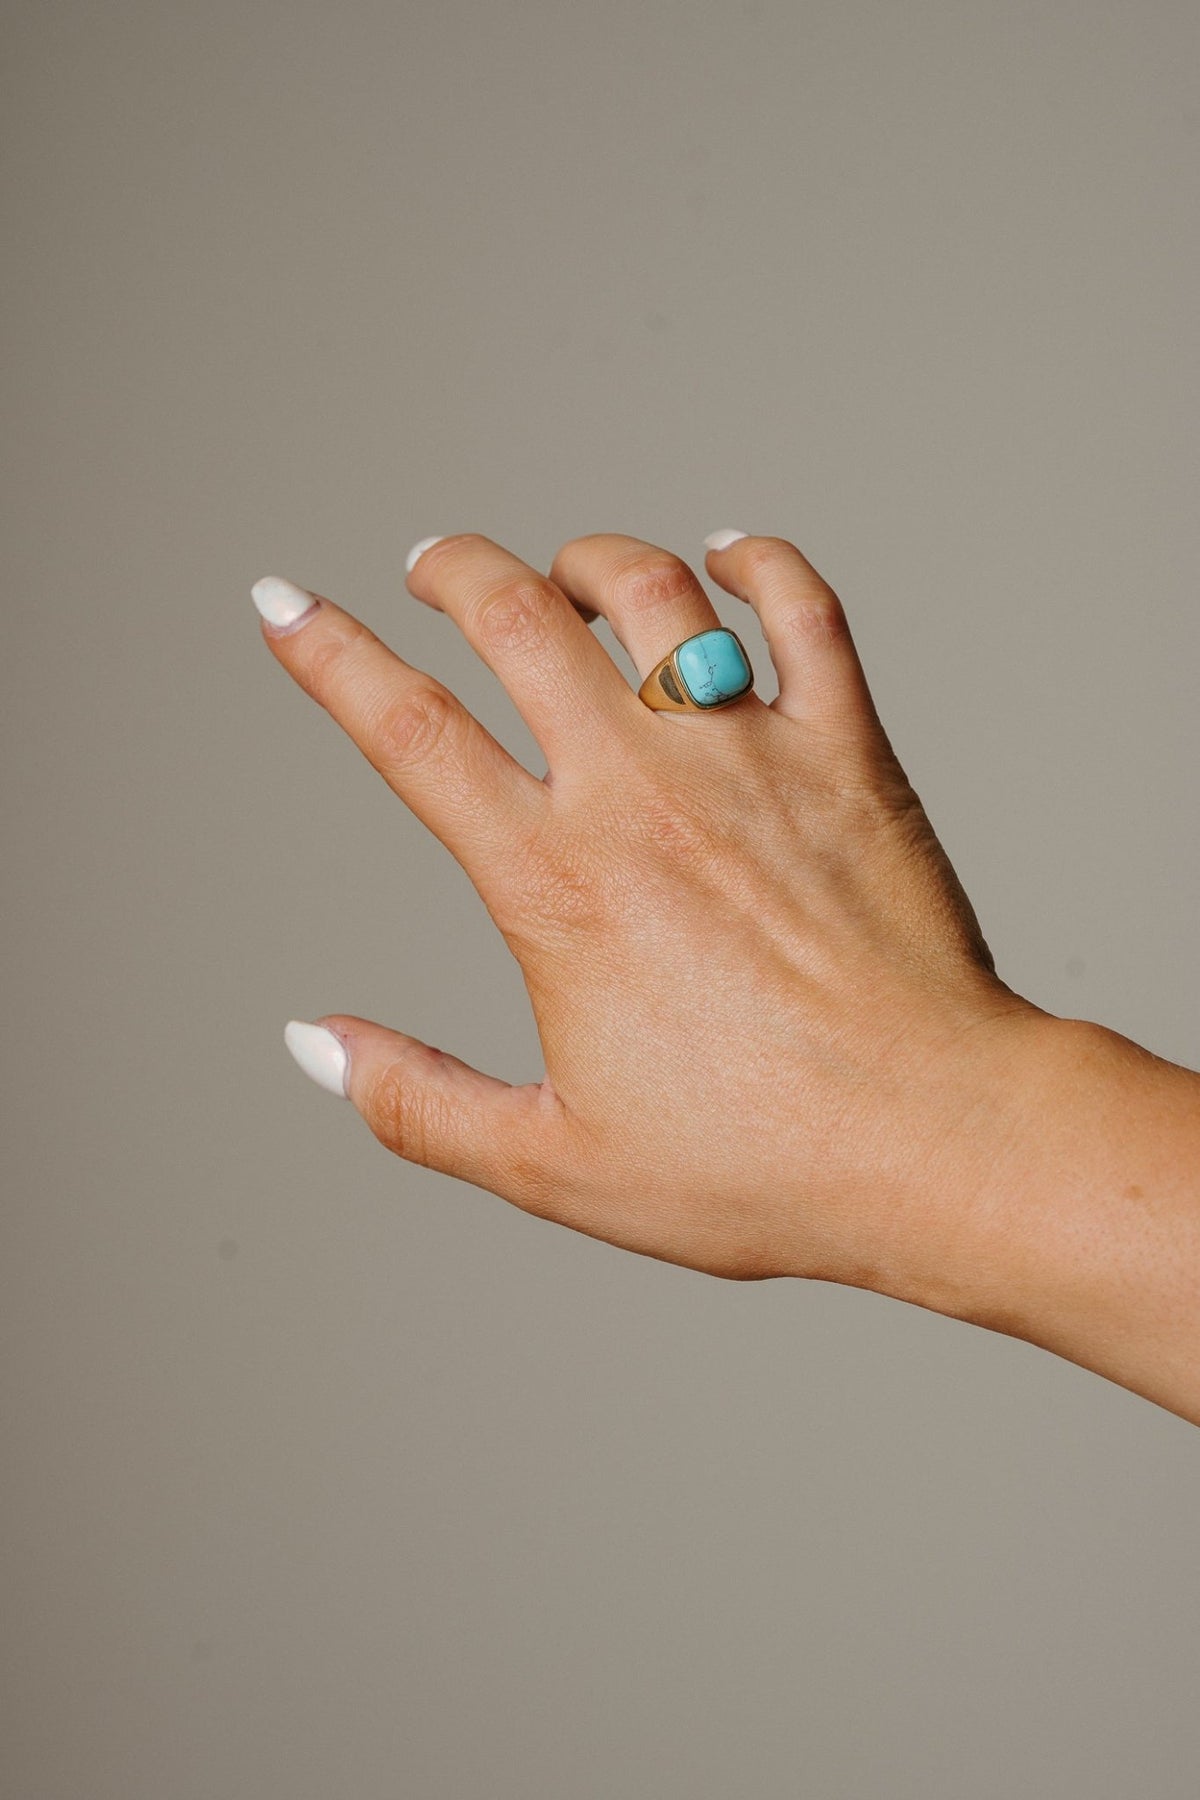 Erin Signet Ring In Turquoise - The Walk in Wardrobe